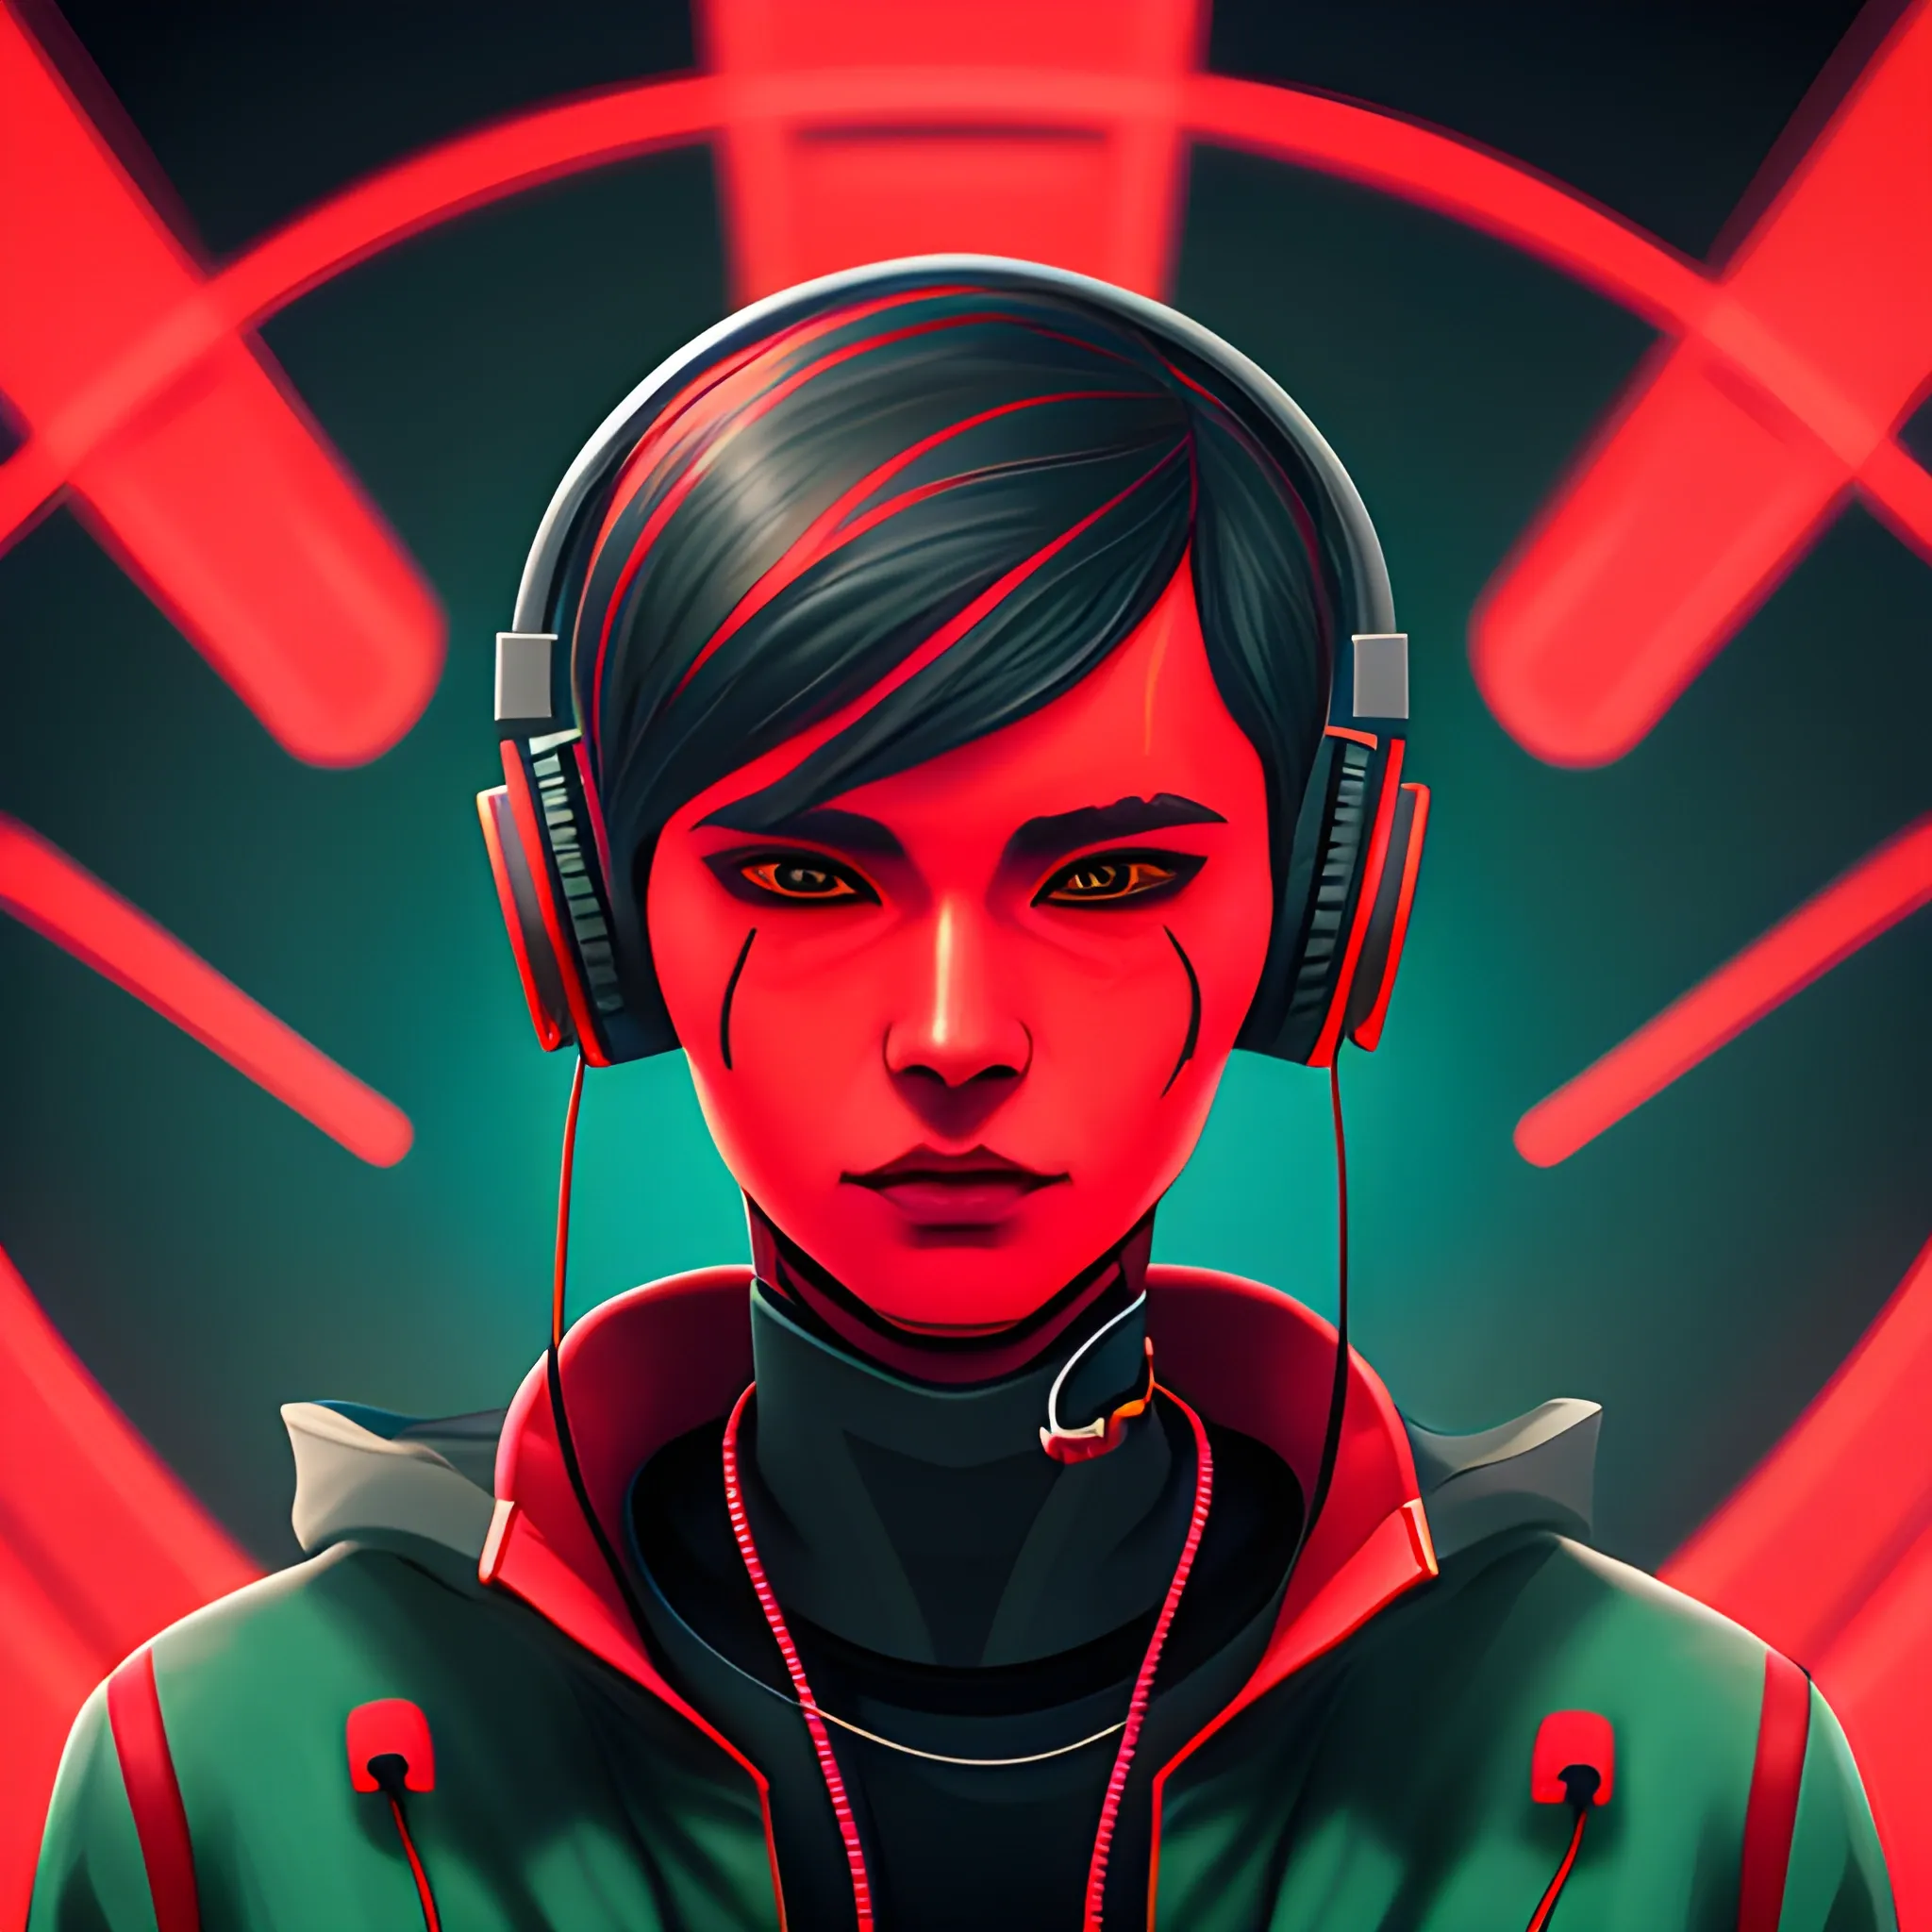 Portrait of dragon streamer with headphones, cyberpunk, red jacket, headphones, streamer, extremely high quality, Cartoon
